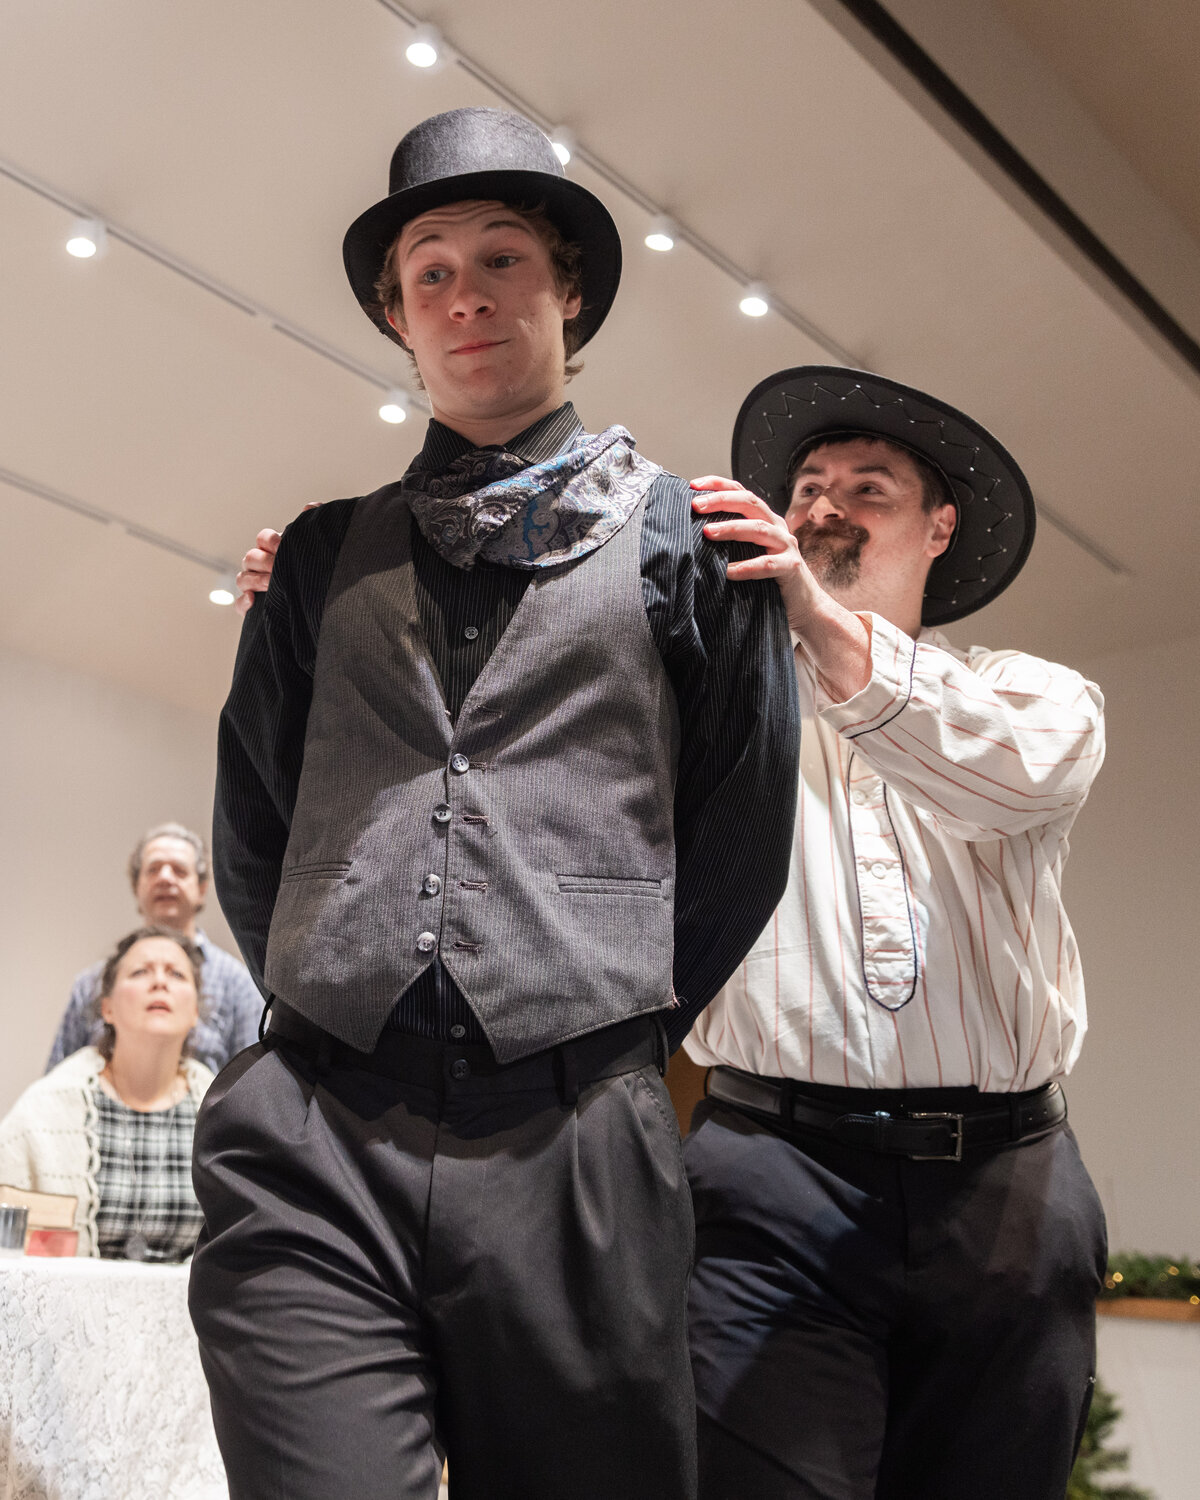 Sam Mittge as Mayor Thomas Percifield, left, and Alex Johnson as Jake Headley, right, perform on stage during dress rehearsals for the Christmas at Rattlesnake Gulch play at Mountain View Baptist Church in Centralia.